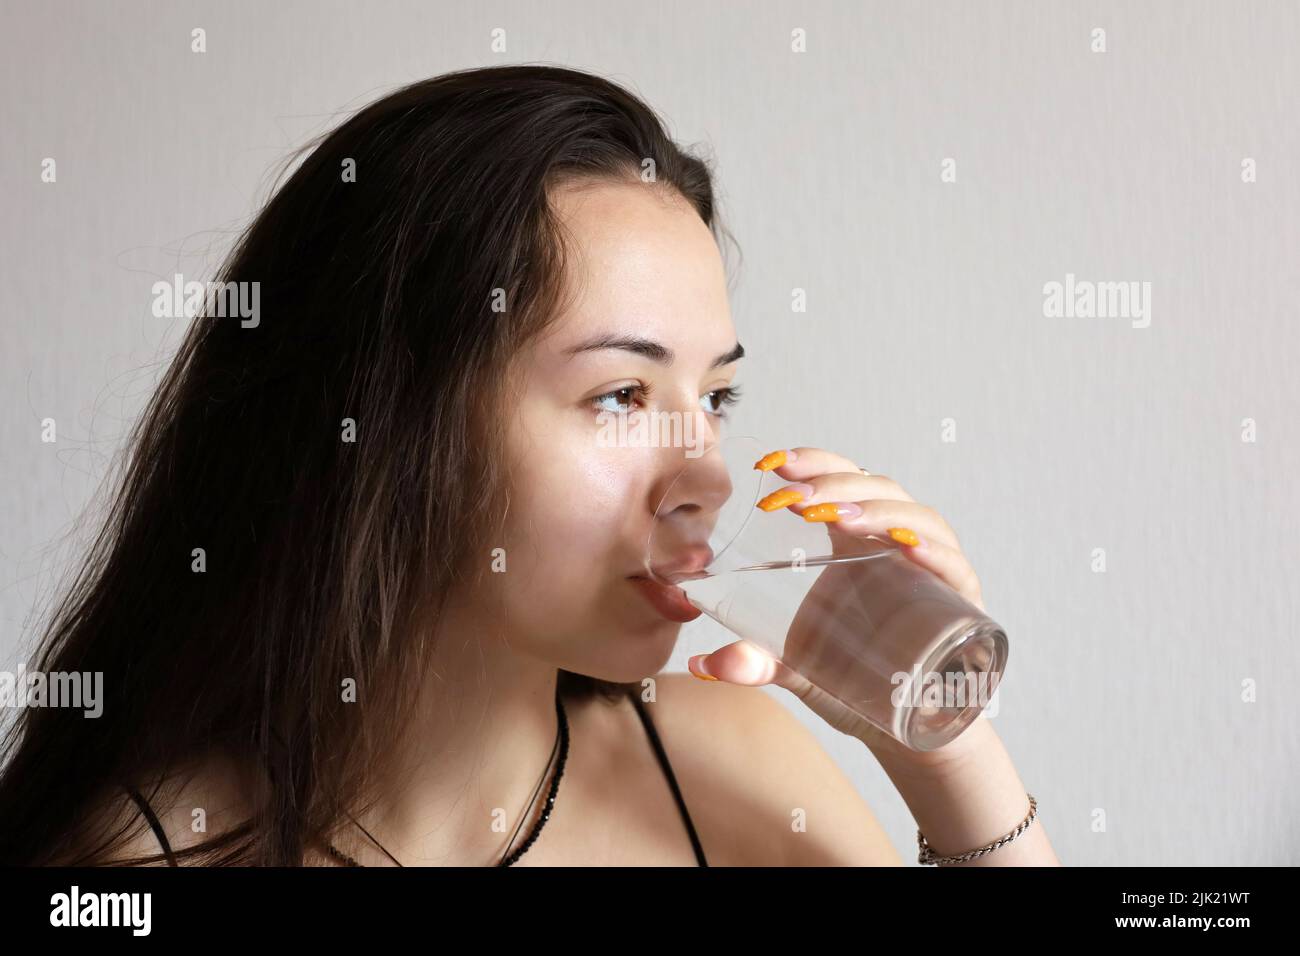 Pretty young girl with long hair drinking clean water, glass in female hands close up. Concept of thirst, diet, water purification, mineral drink Stock Photo